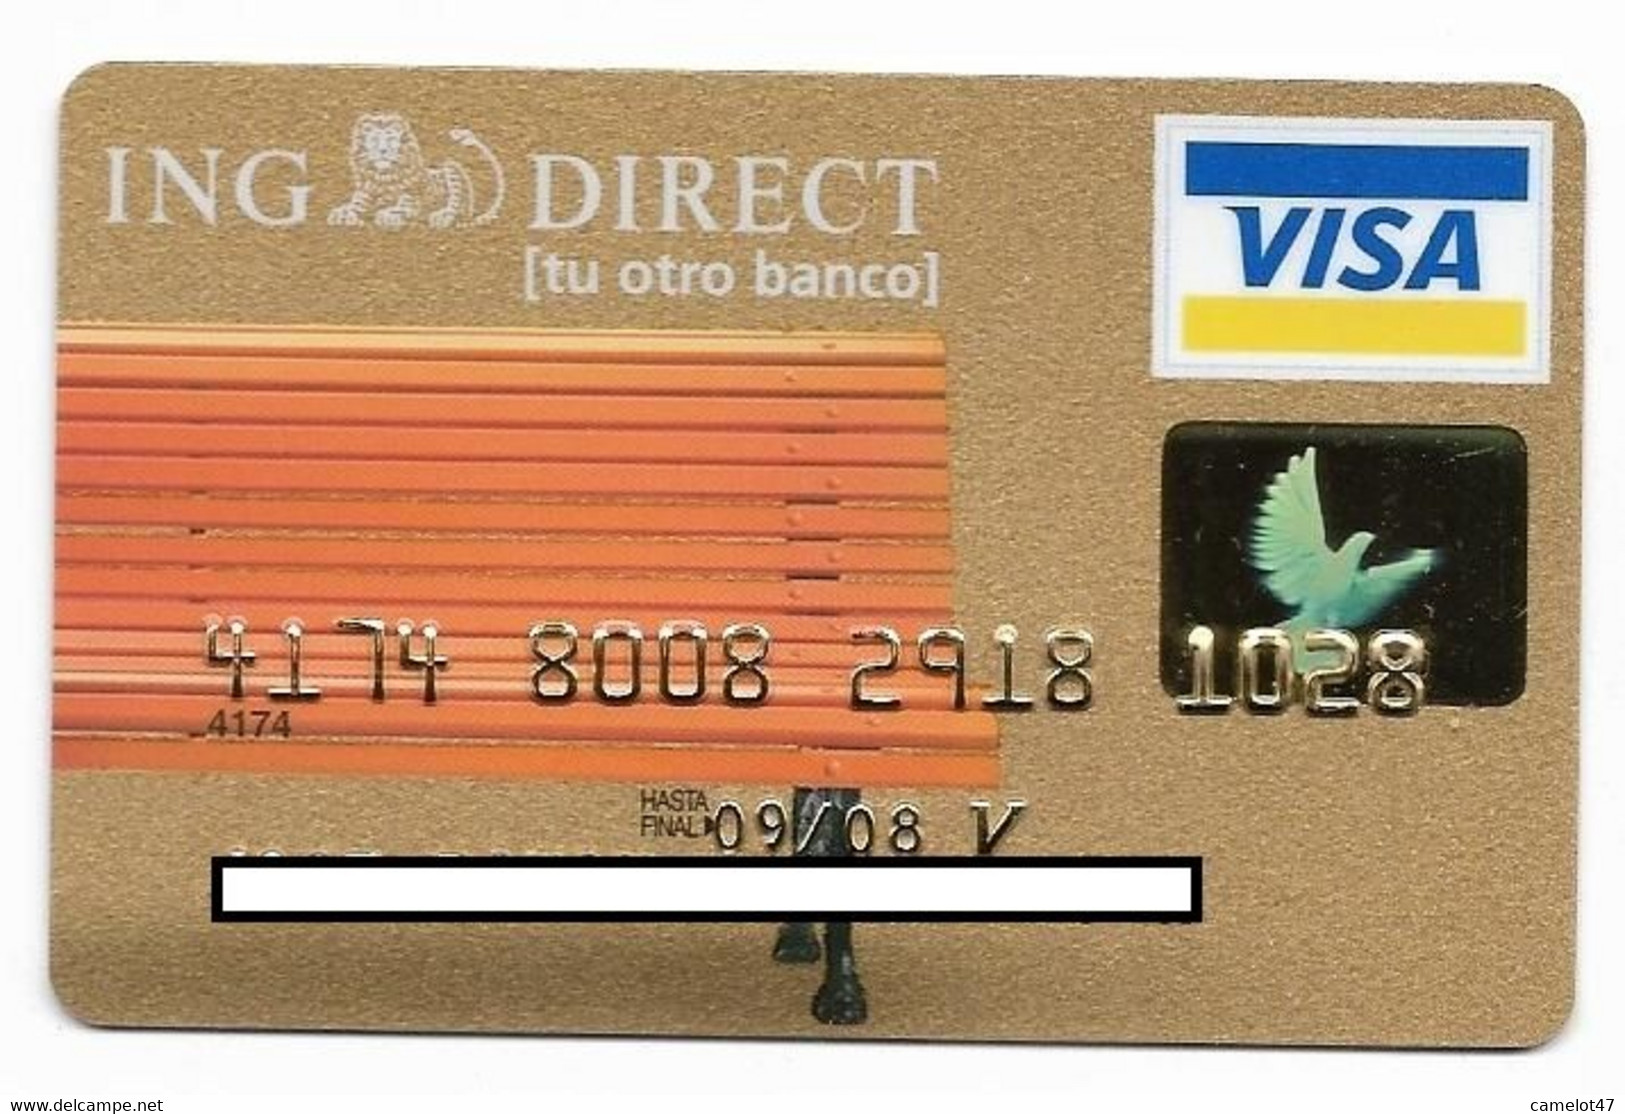 ING Direct, Spain, Magnetic MasterCard Credit Card, # Cc-141 - Credit Cards (Exp. Date Min. 10 Years)